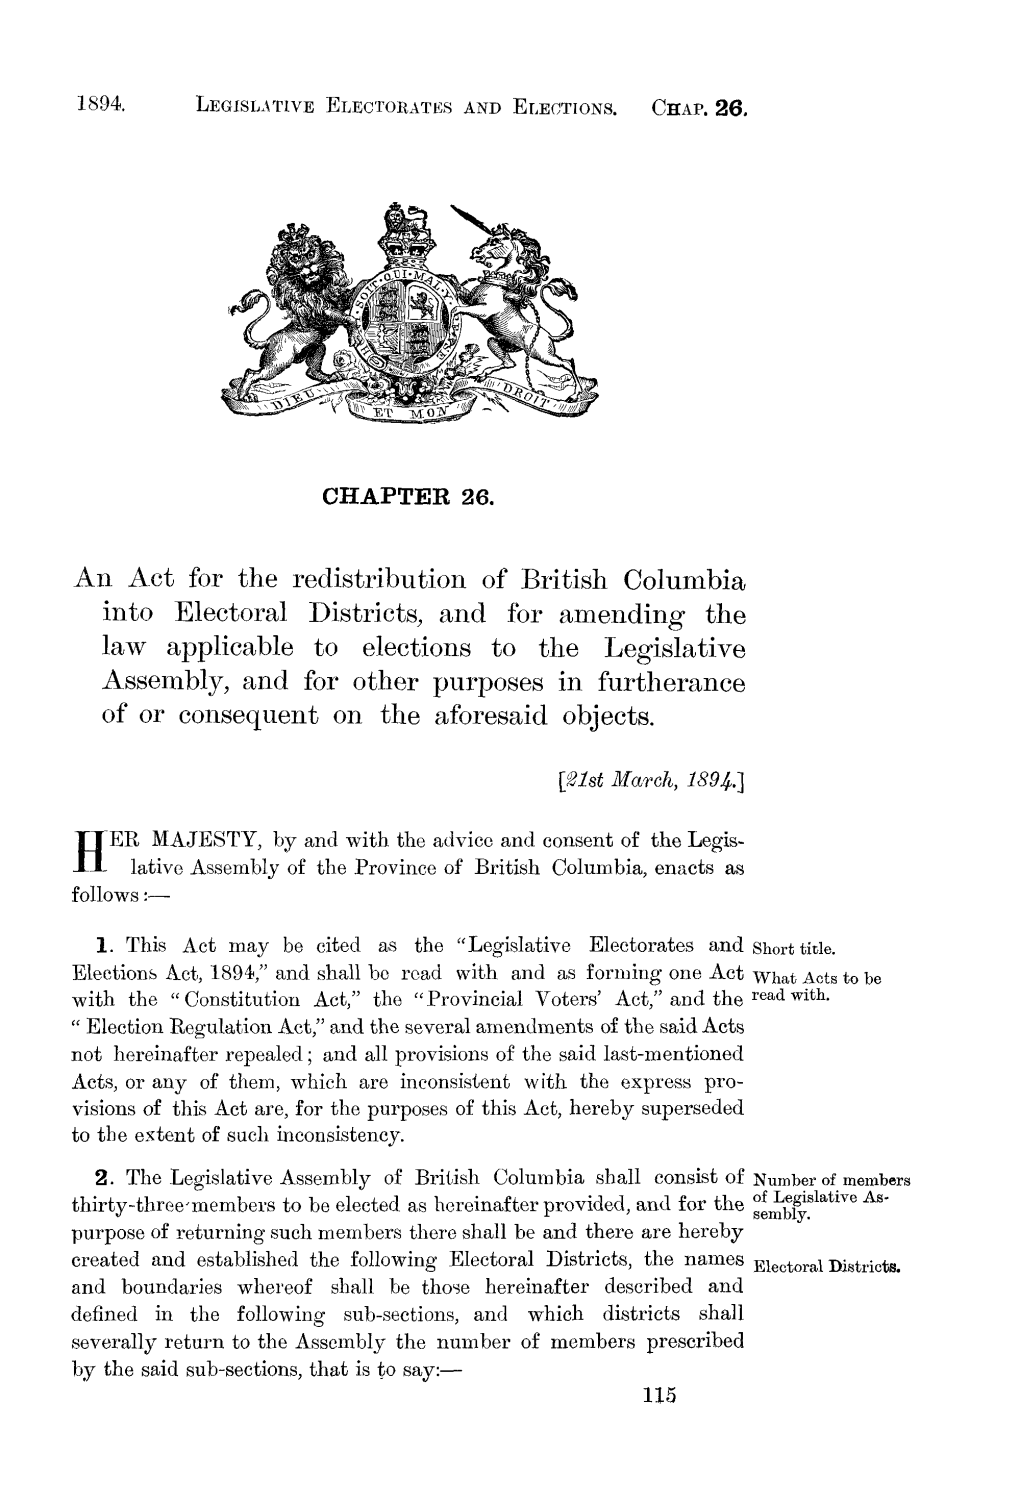 An Act for the Redistribution of British Columbia Into Electoral Districts